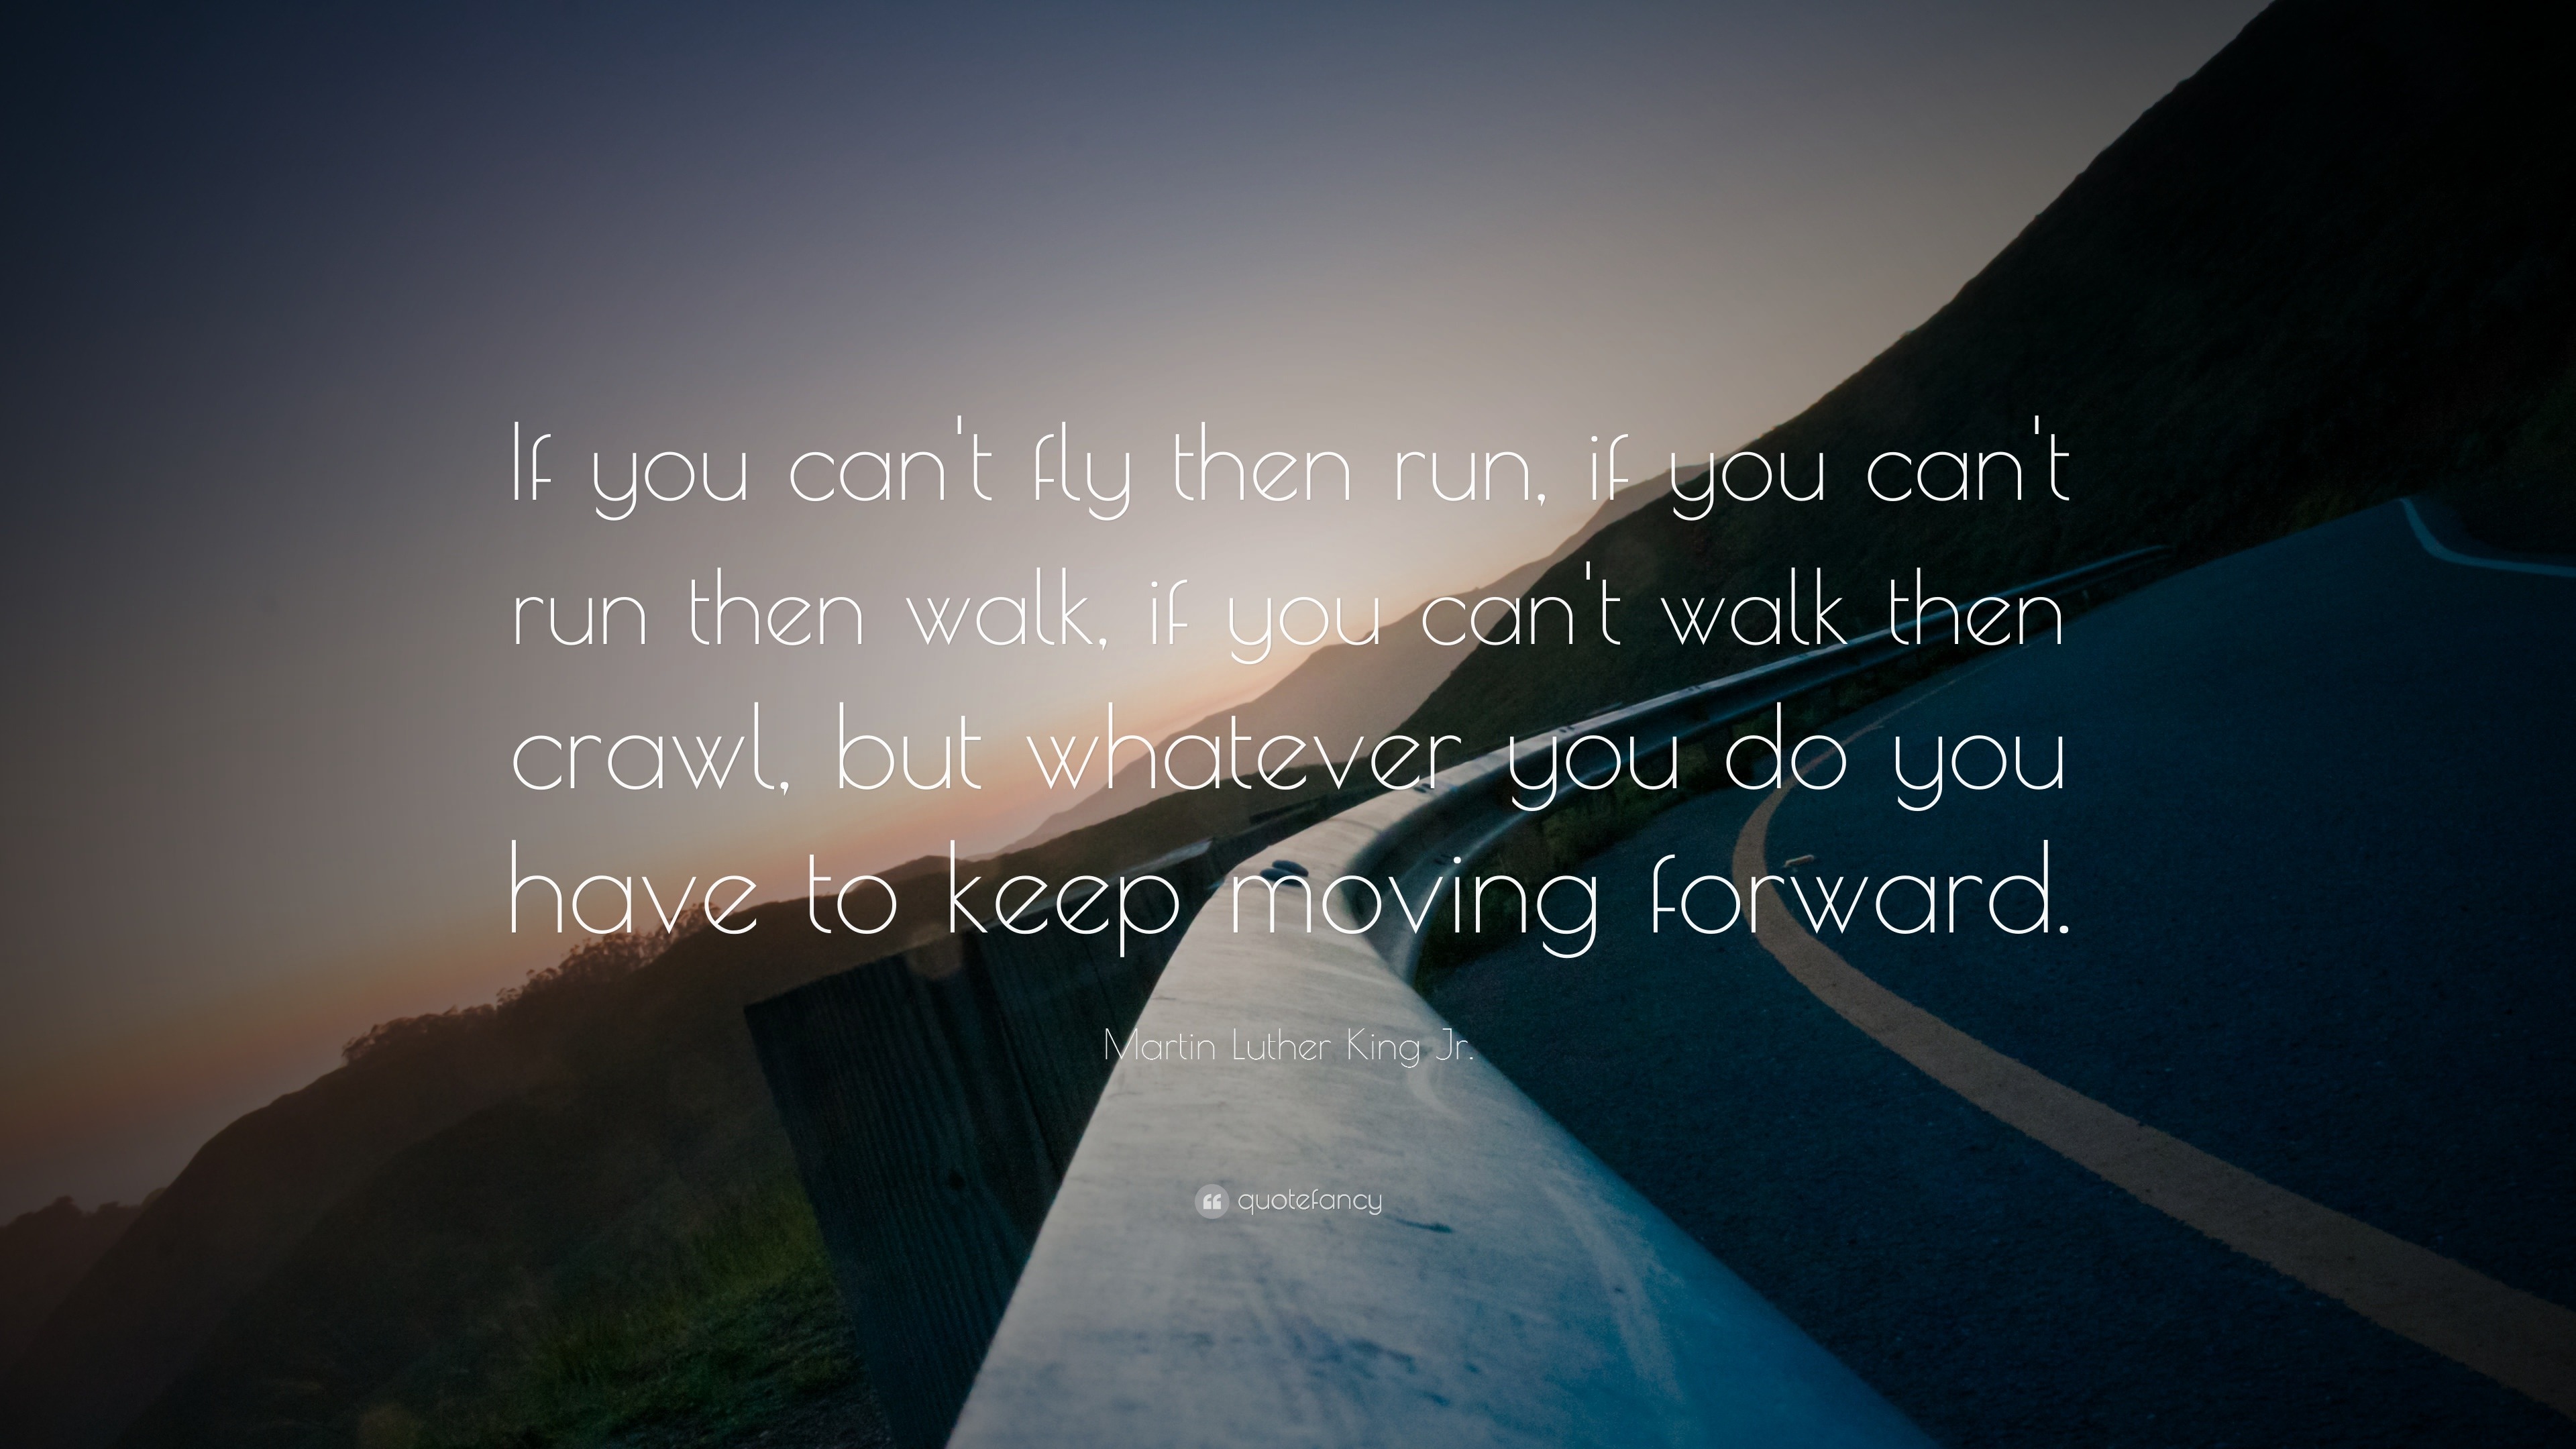 838 Martin Luther King Jr Quote If you can t fly then run if you can t